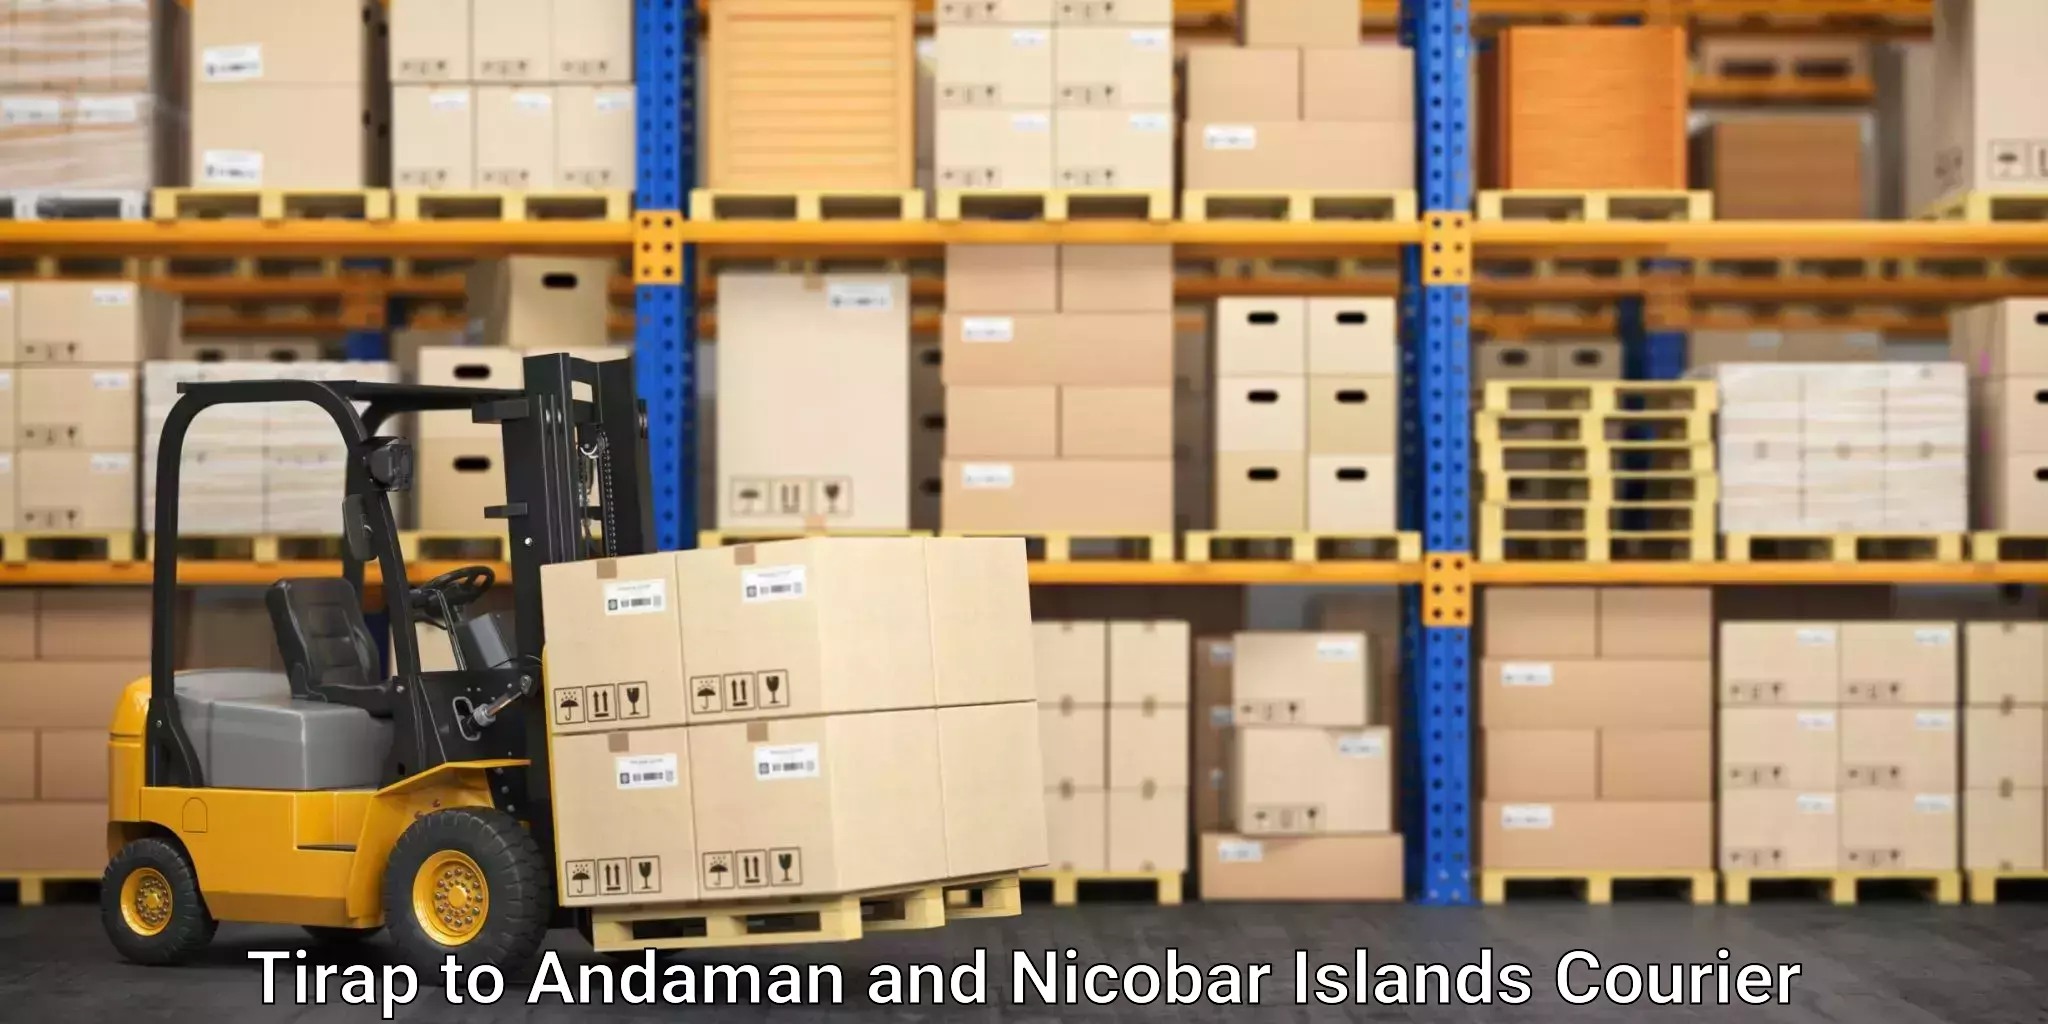 Reliable delivery network Tirap to Andaman and Nicobar Islands